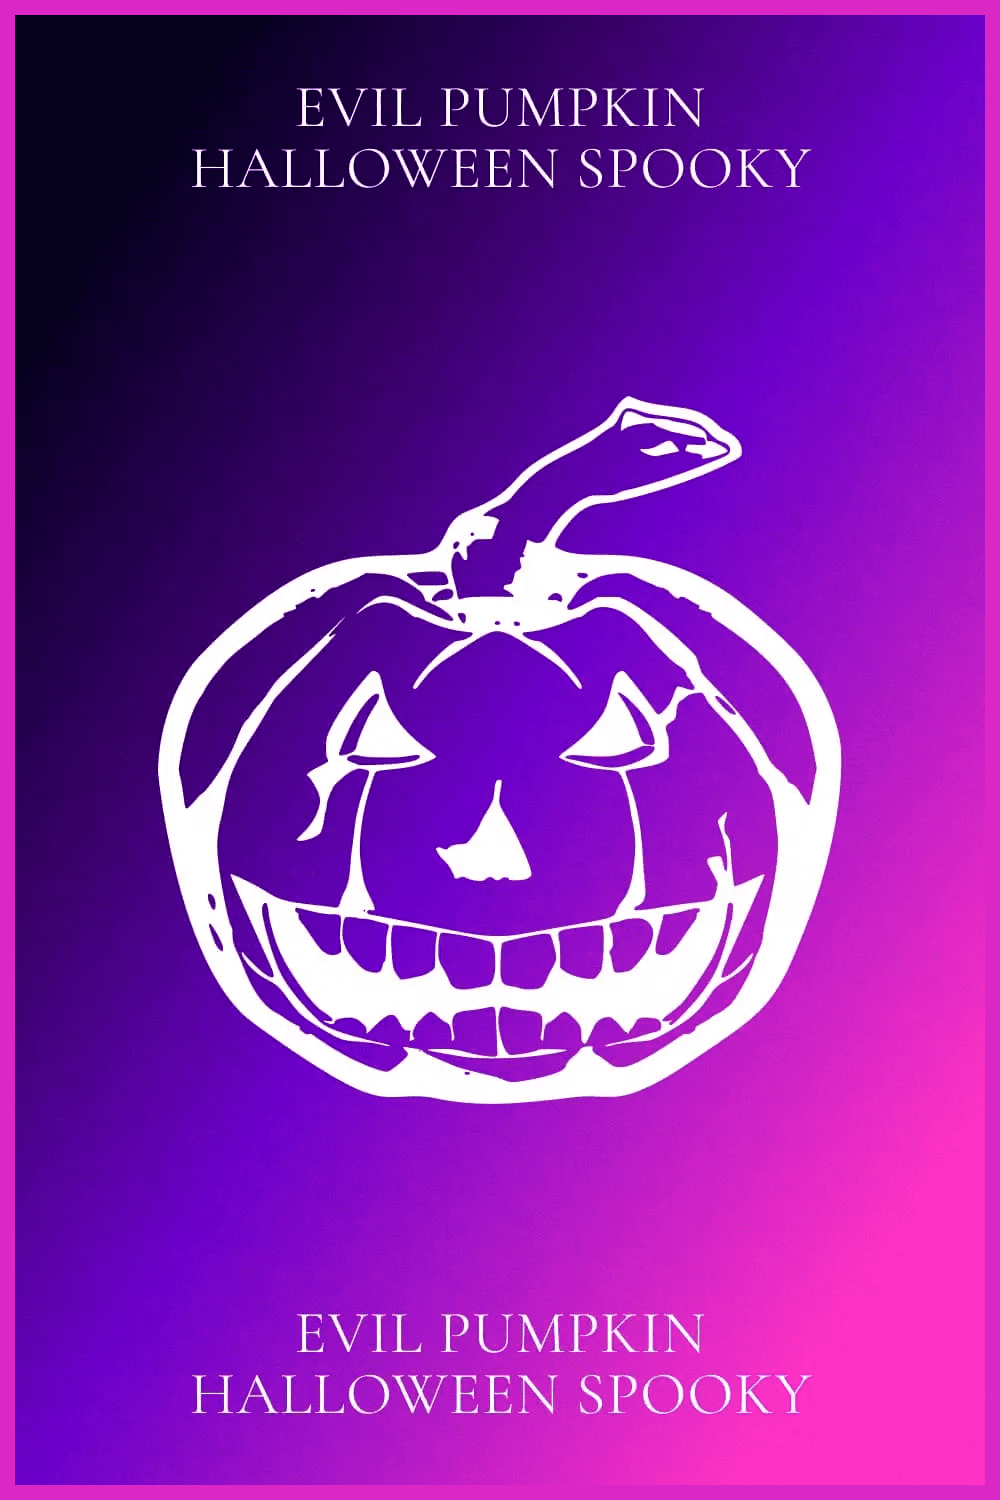 White pumpkin with an evil smile on a purple-pink background.